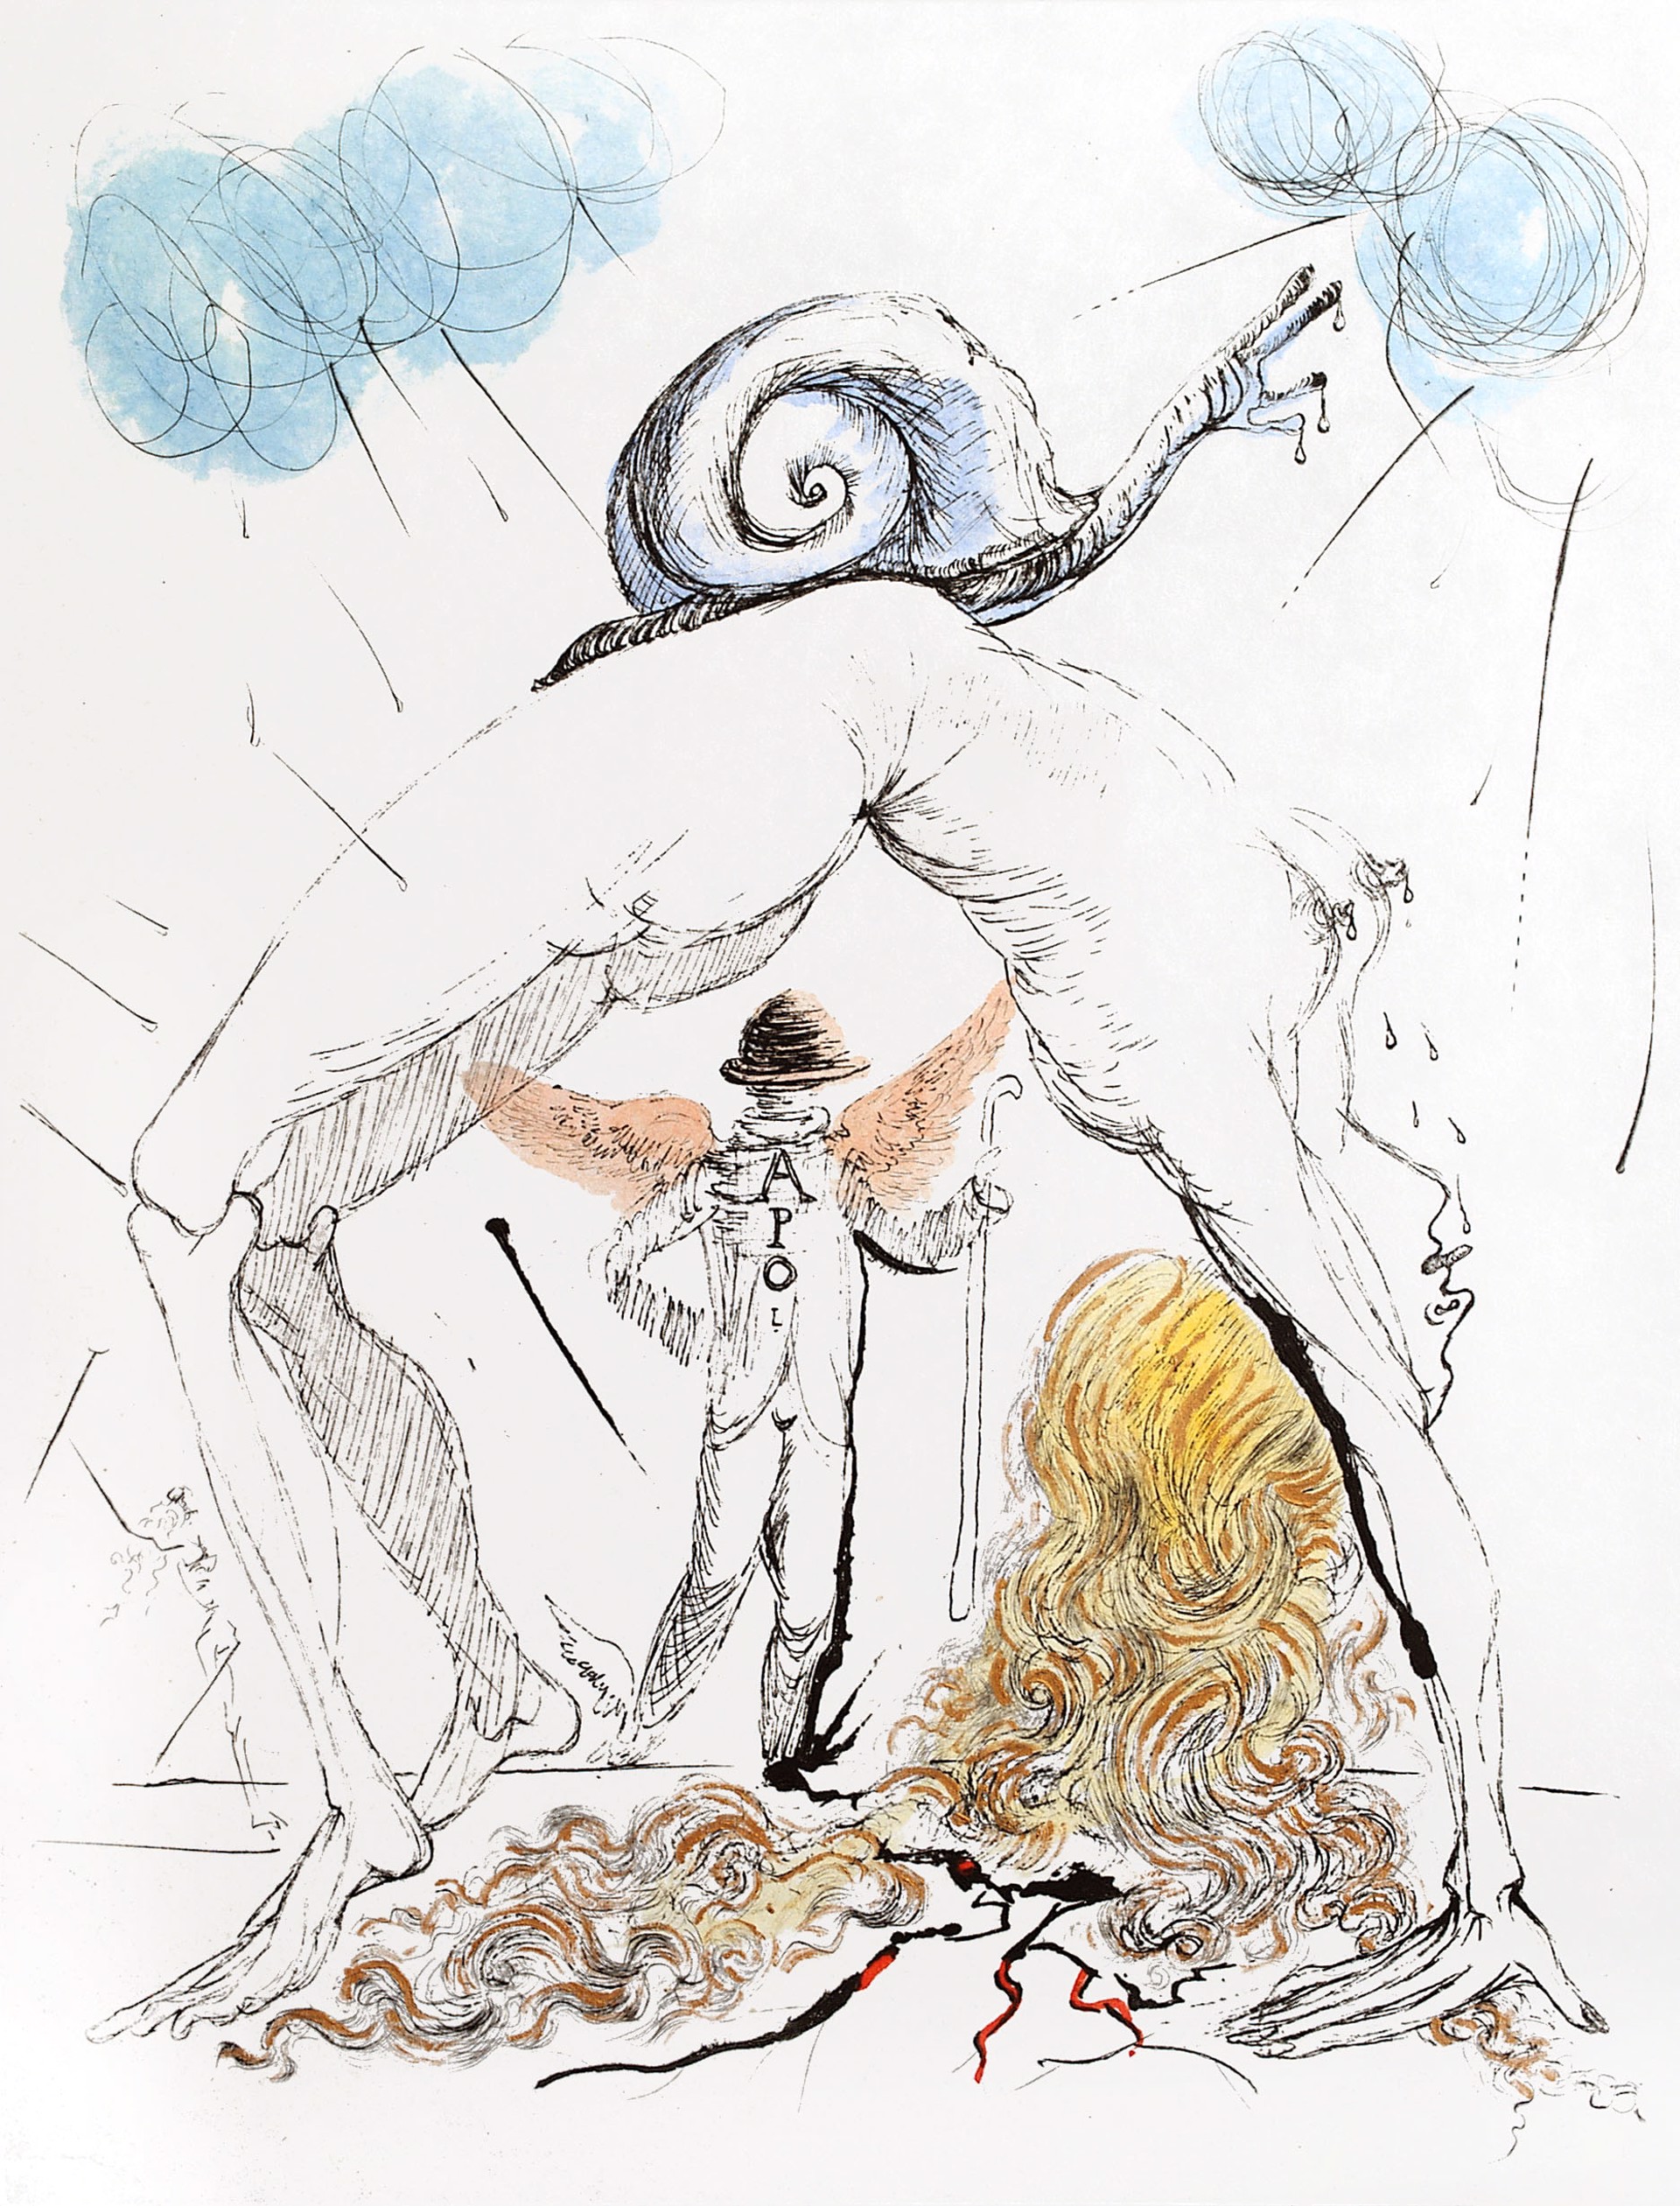 Apollinaire "Woman with Snail" by Salvador Dali